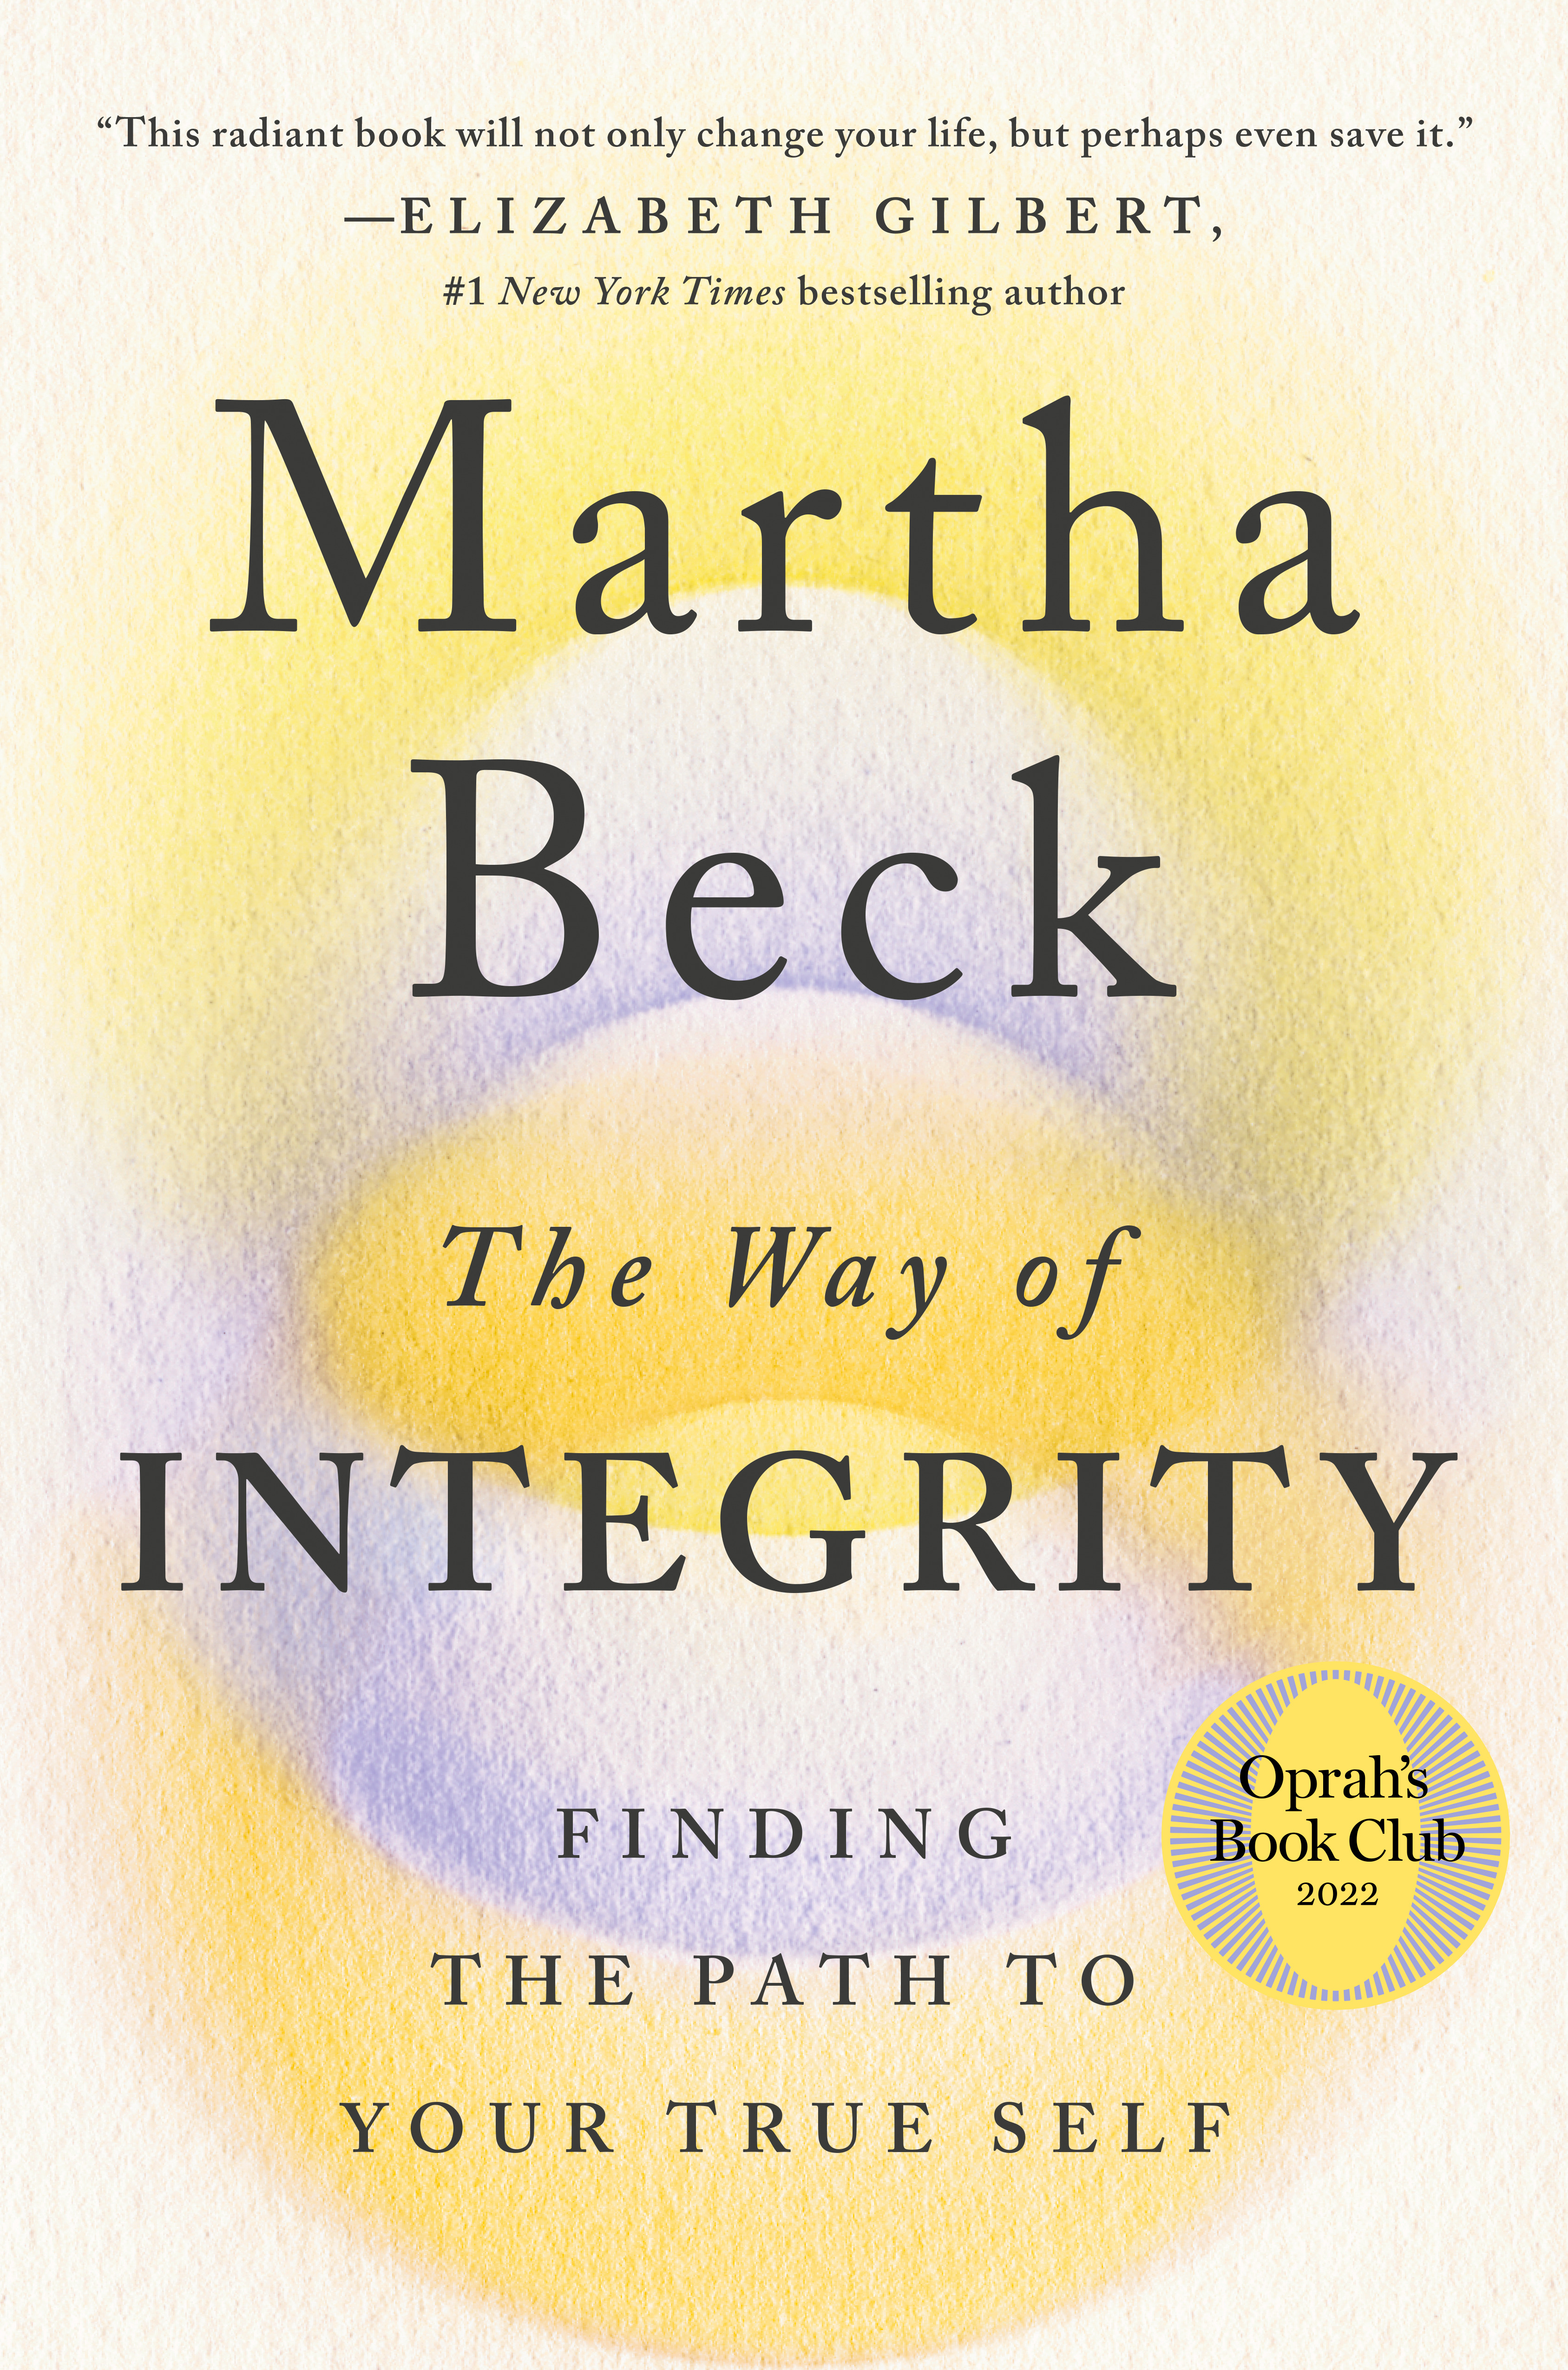 The Way of Integrity : Finding the Path to Your True Self | Psychology & Self-Improvement